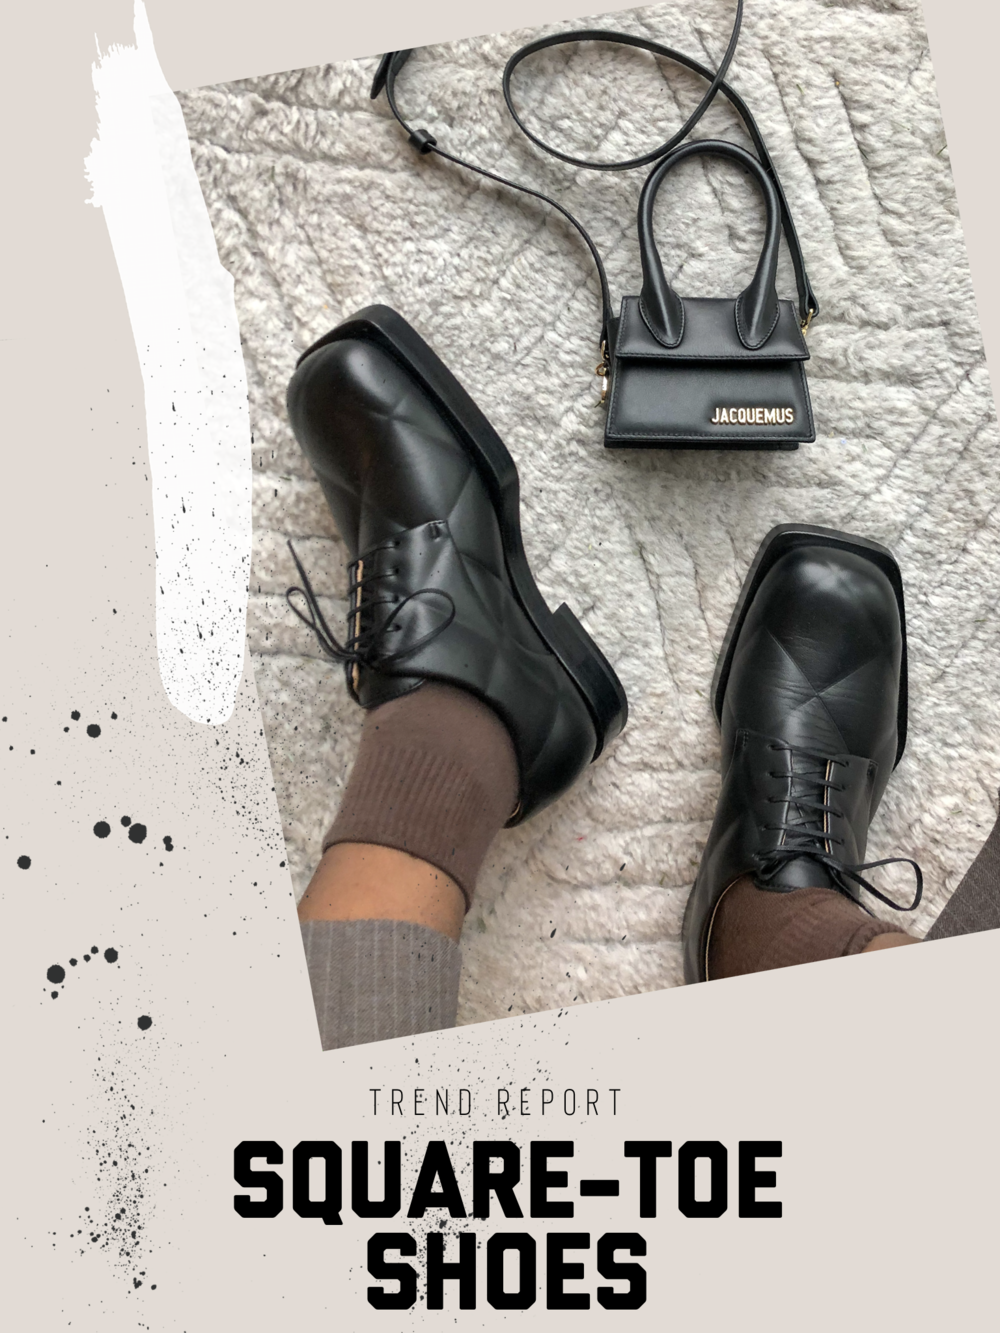 Square-Toe Shoes: Is This a Trend We Should Be Supporting?Blog post, luxury  images— The Luxury Choyce | Jay Choyce Tibbitts